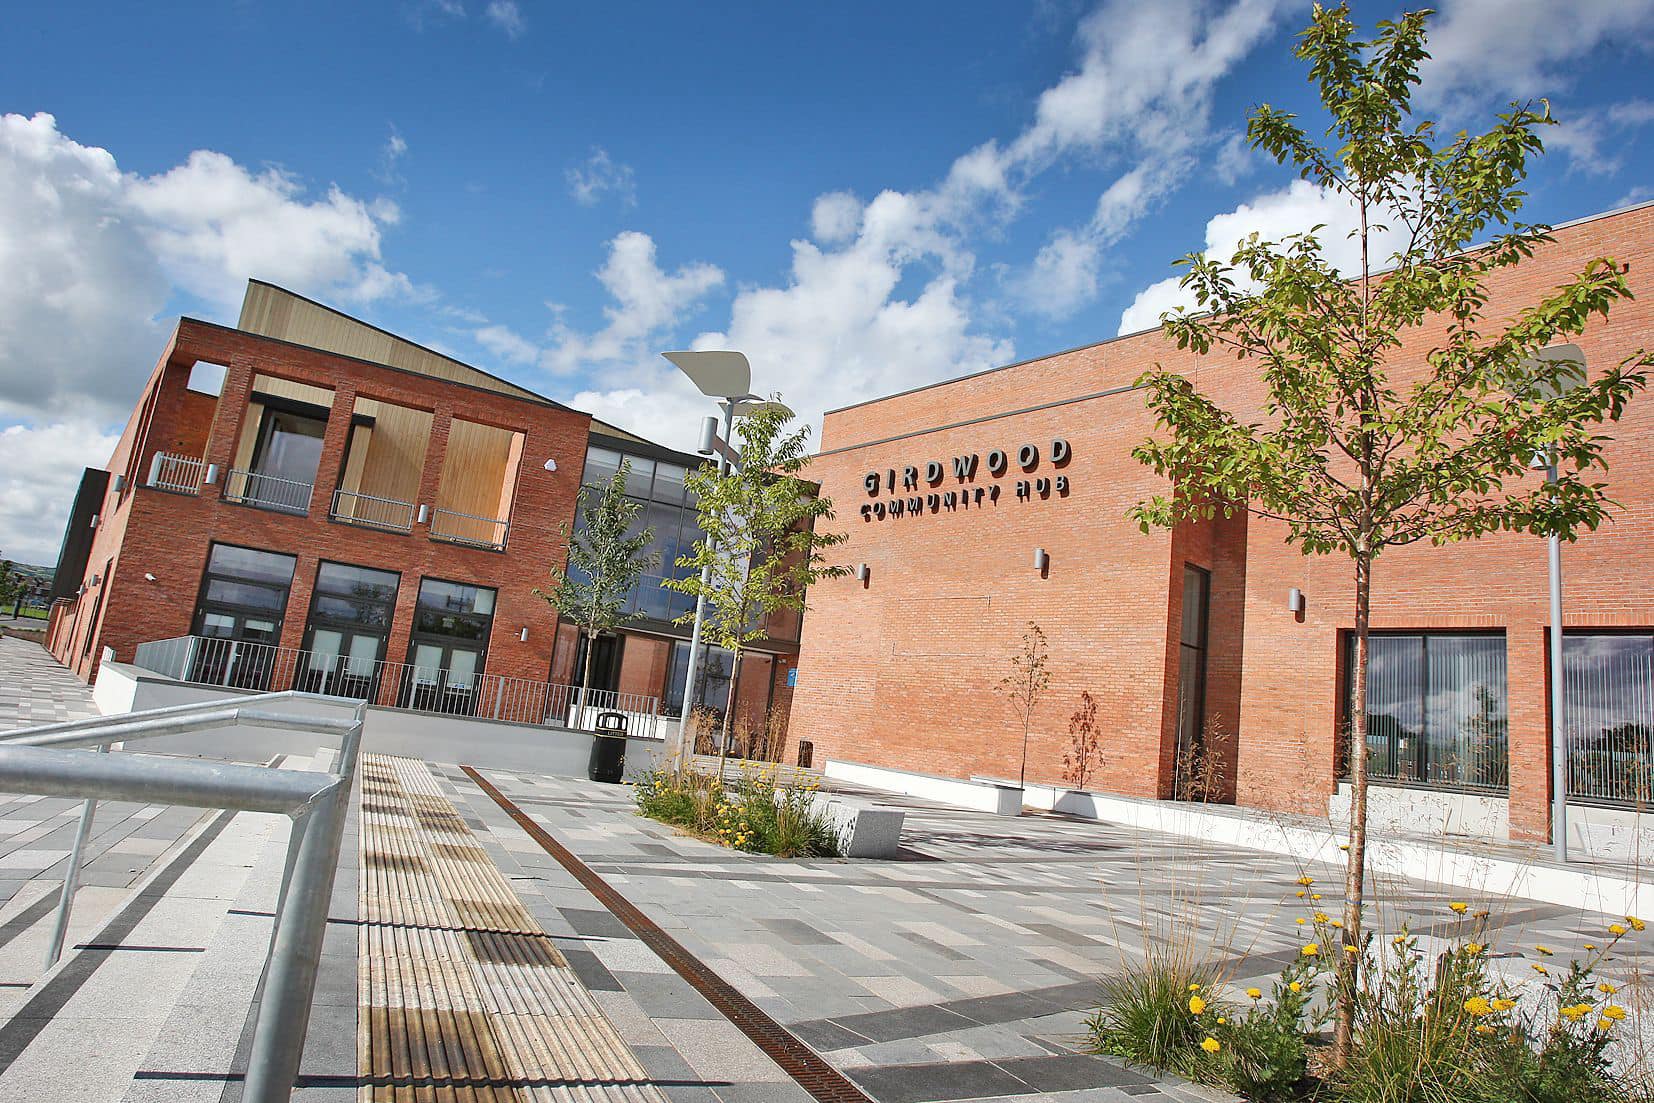 GIRDWOOD REGENERATION: Girdwood Community Hub has been delivered as part of the project